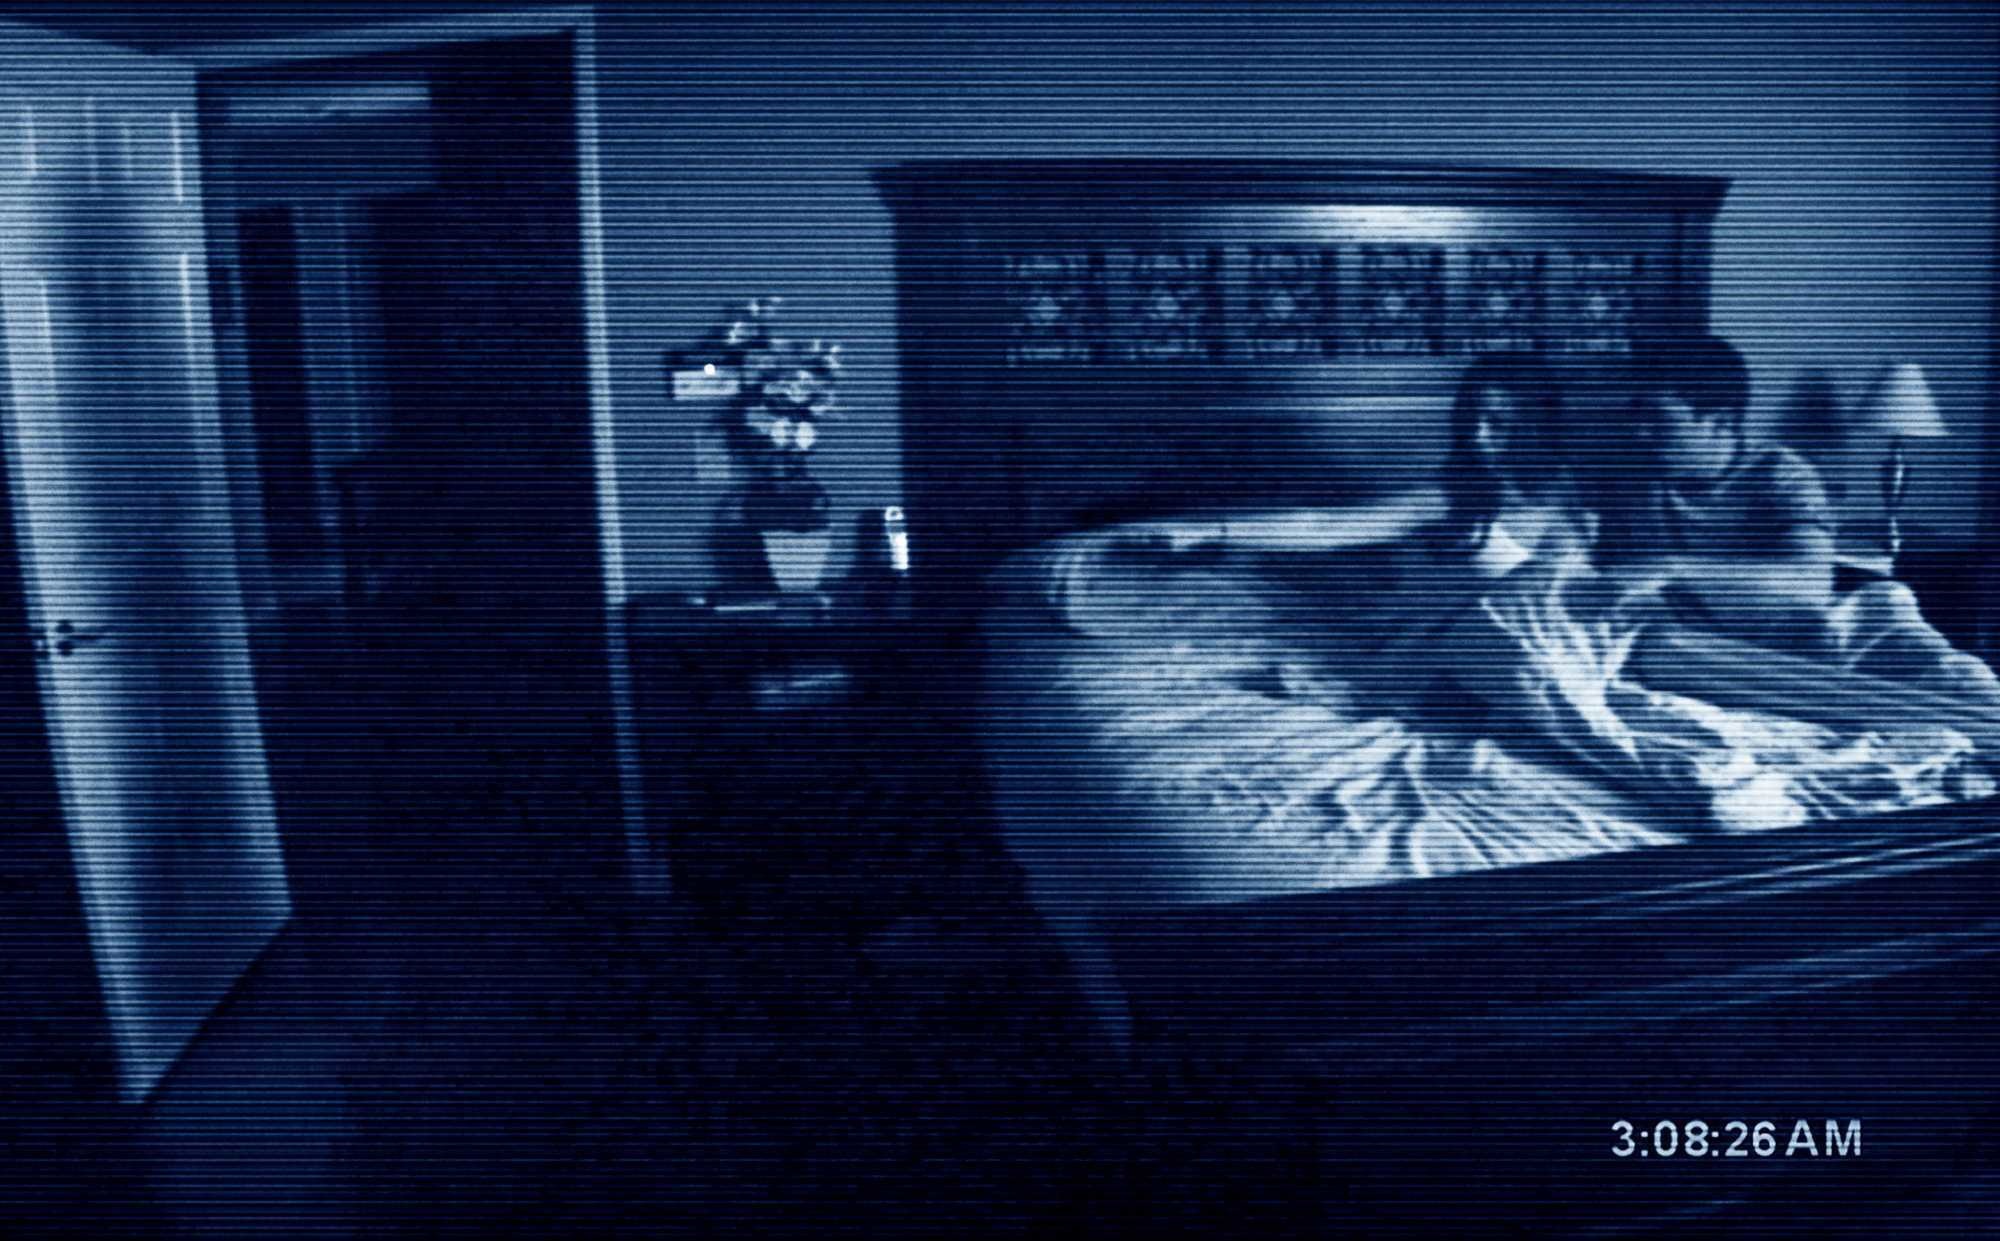 Paranormal Activity cost less than $15,000 to make but made over $193,000,000.